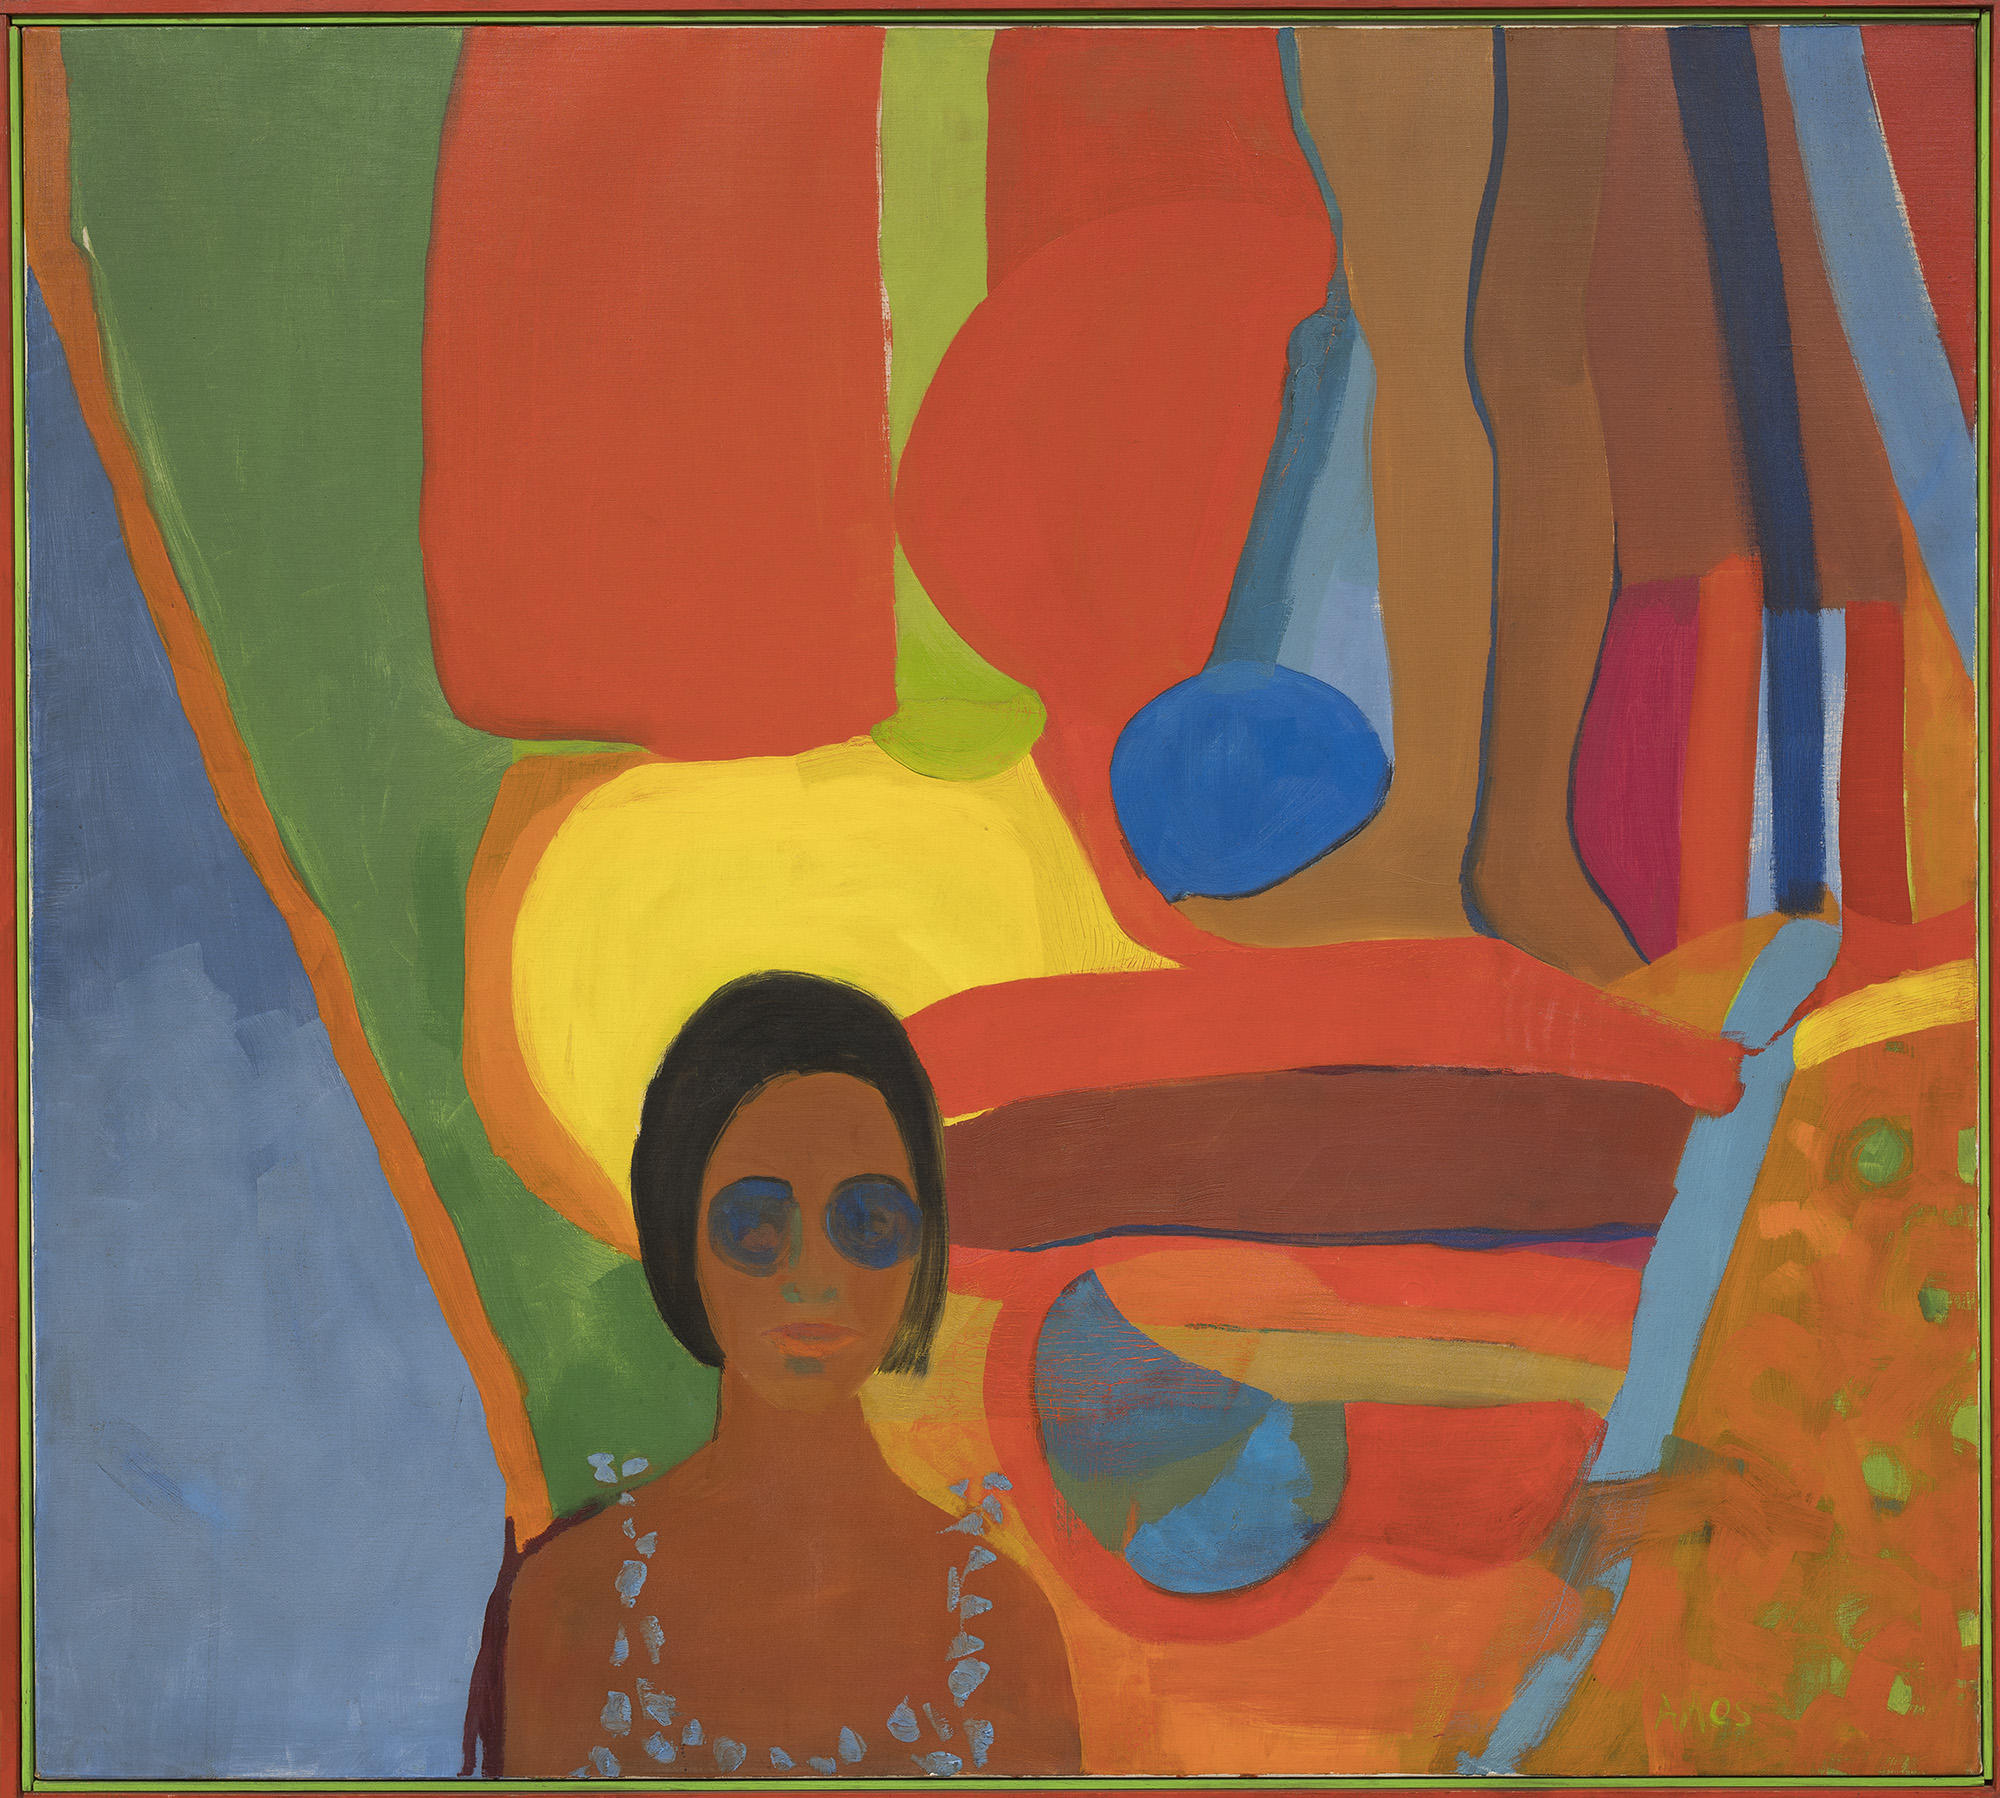  Emma Amos (b. 1938),  Baby , 1966. Oil on canvas, 46 1/2 × 51 in. (118.1 × 129.5 cm). Whitney Museum of American Art, New York; purchased jointly by the Whitney Museum of American Art, with funds from the Painting and Sculpture Committee; and The St